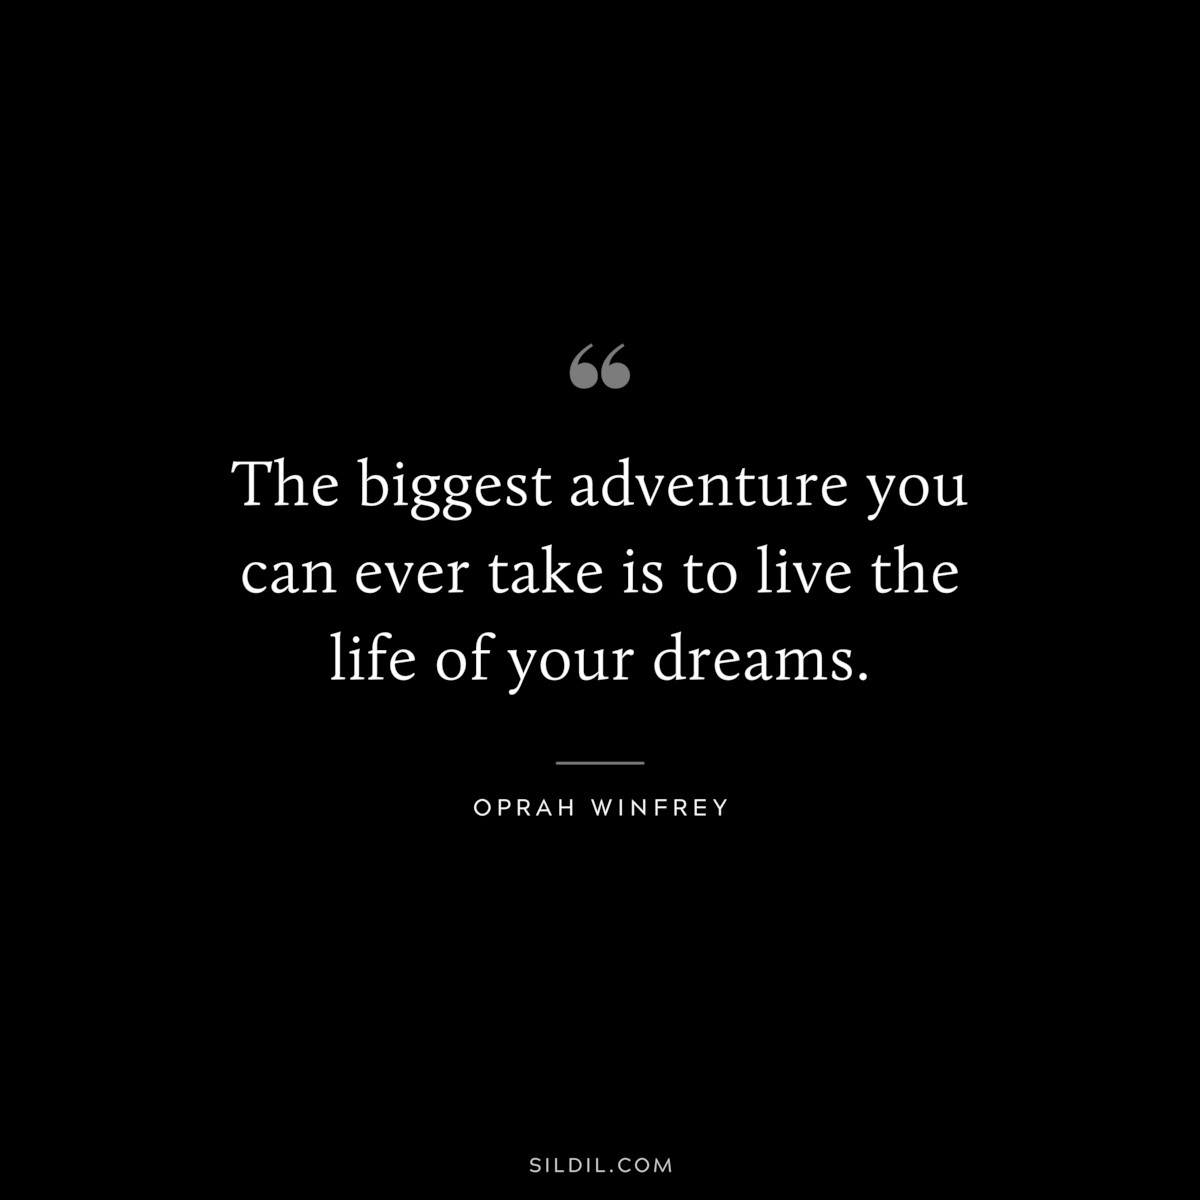 The biggest adventure you can ever take is to live the life of your dreams. ― Oprah Winfrey